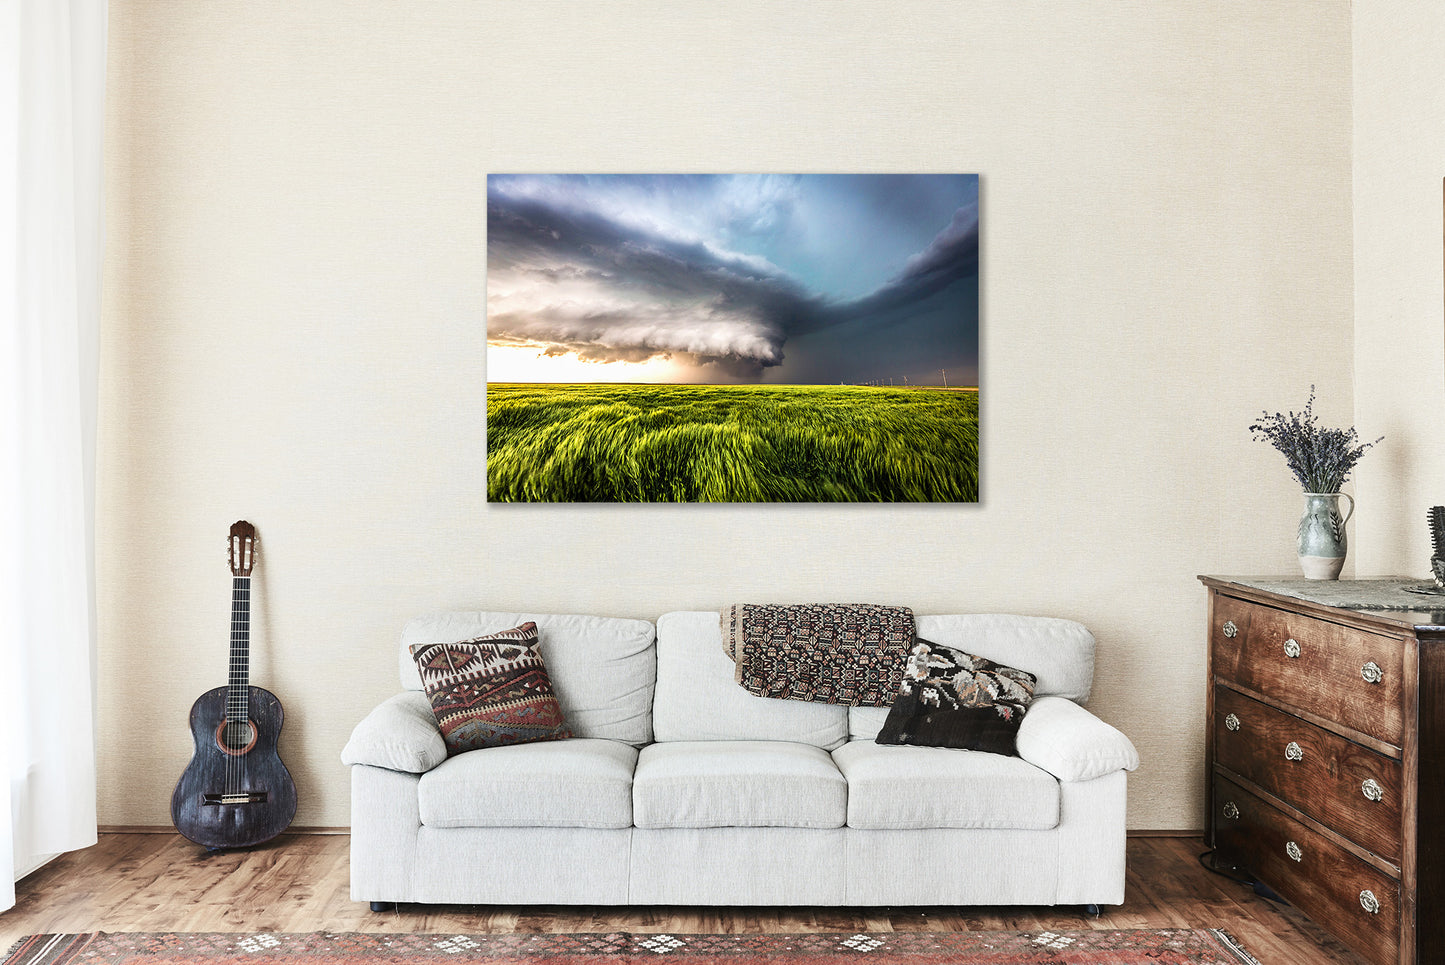 Supercell Thunderstorm Metal Print | Storm Photography | Kansas Wall Art | Weather Photo | Nature Decor | Ready to Hang